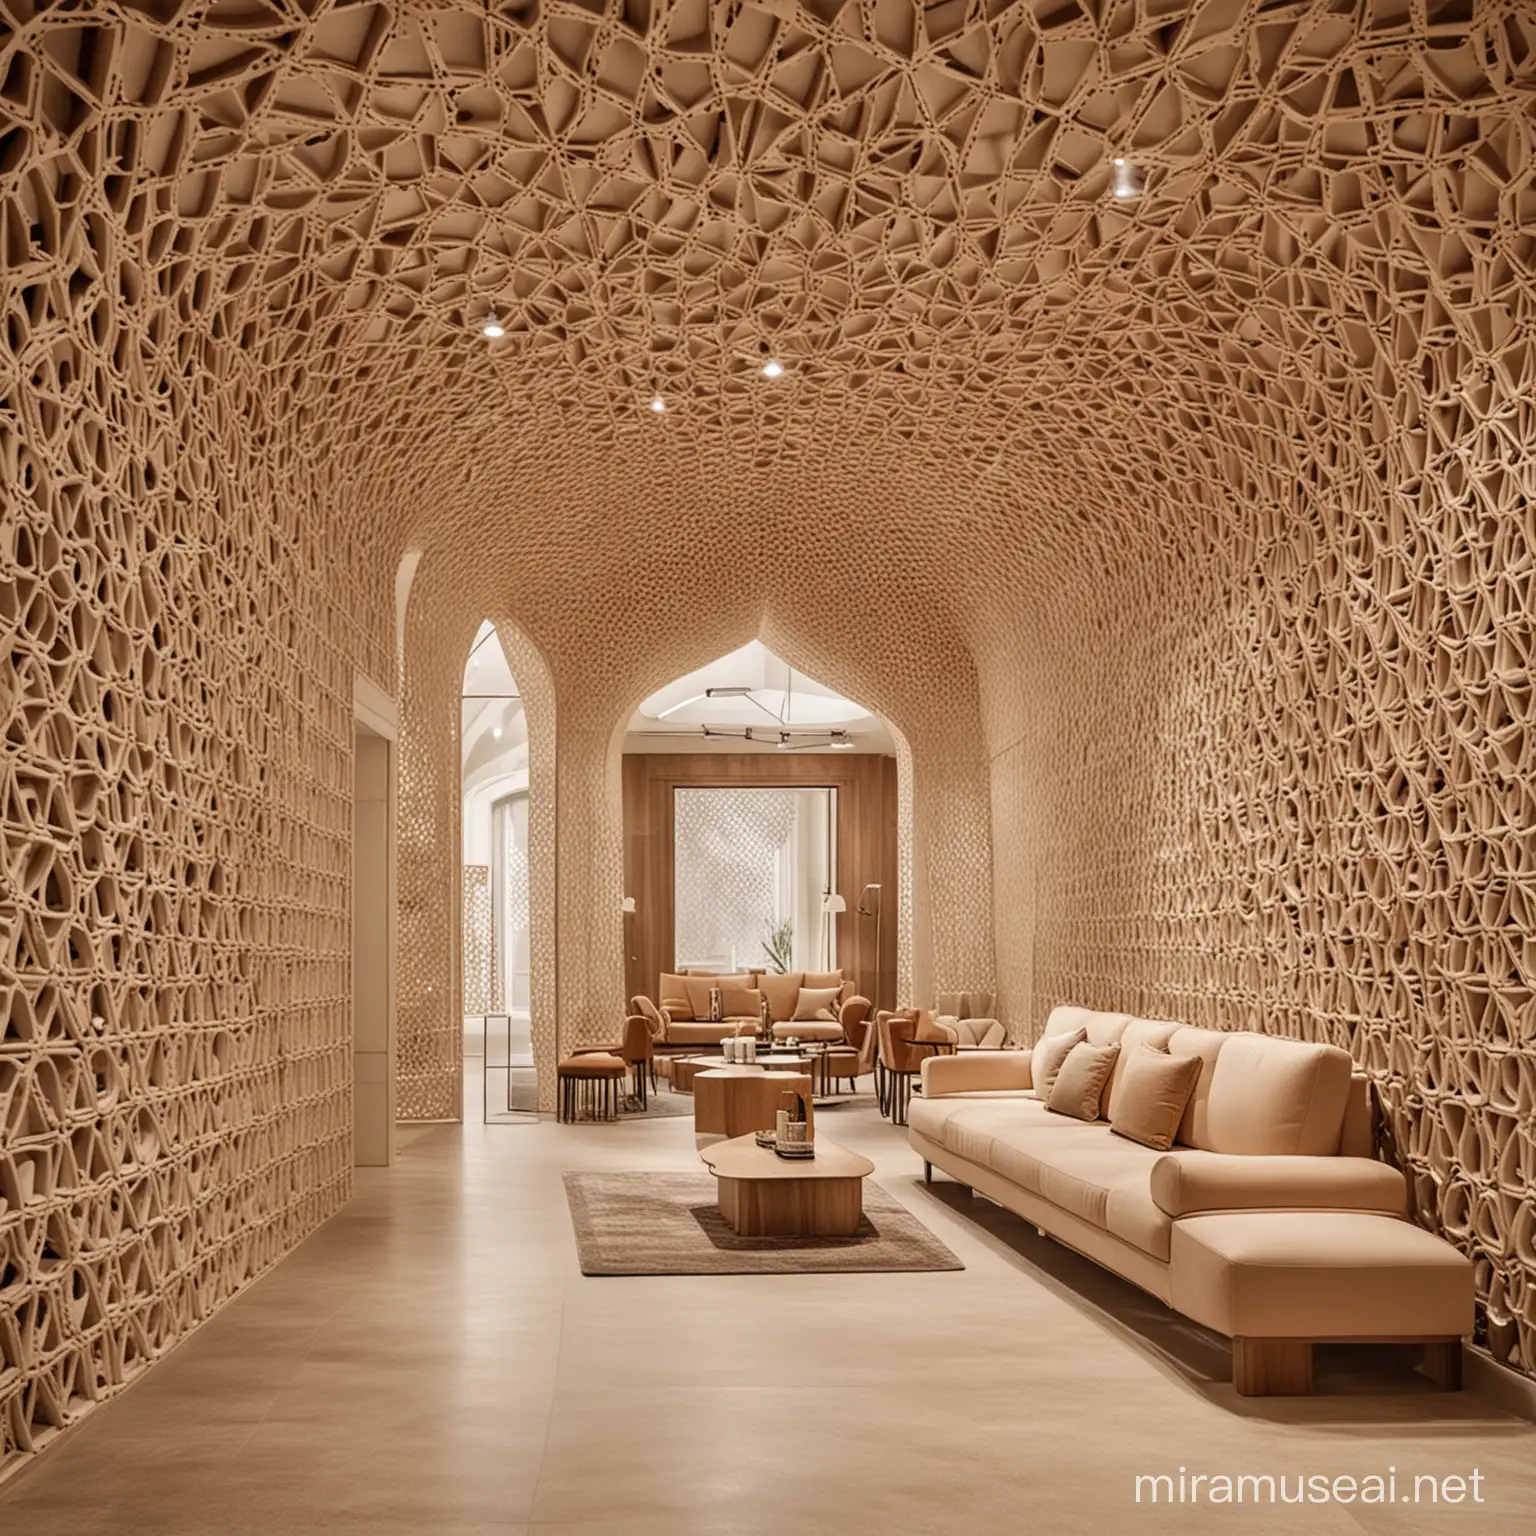 A stunning parametric interior design of showroom , inspired by the intricate architecture of Jaipur, adorns the showroom of our company. Jaipur's unique patterns and textures are a perfect representation of our diverse and creative approach to design.